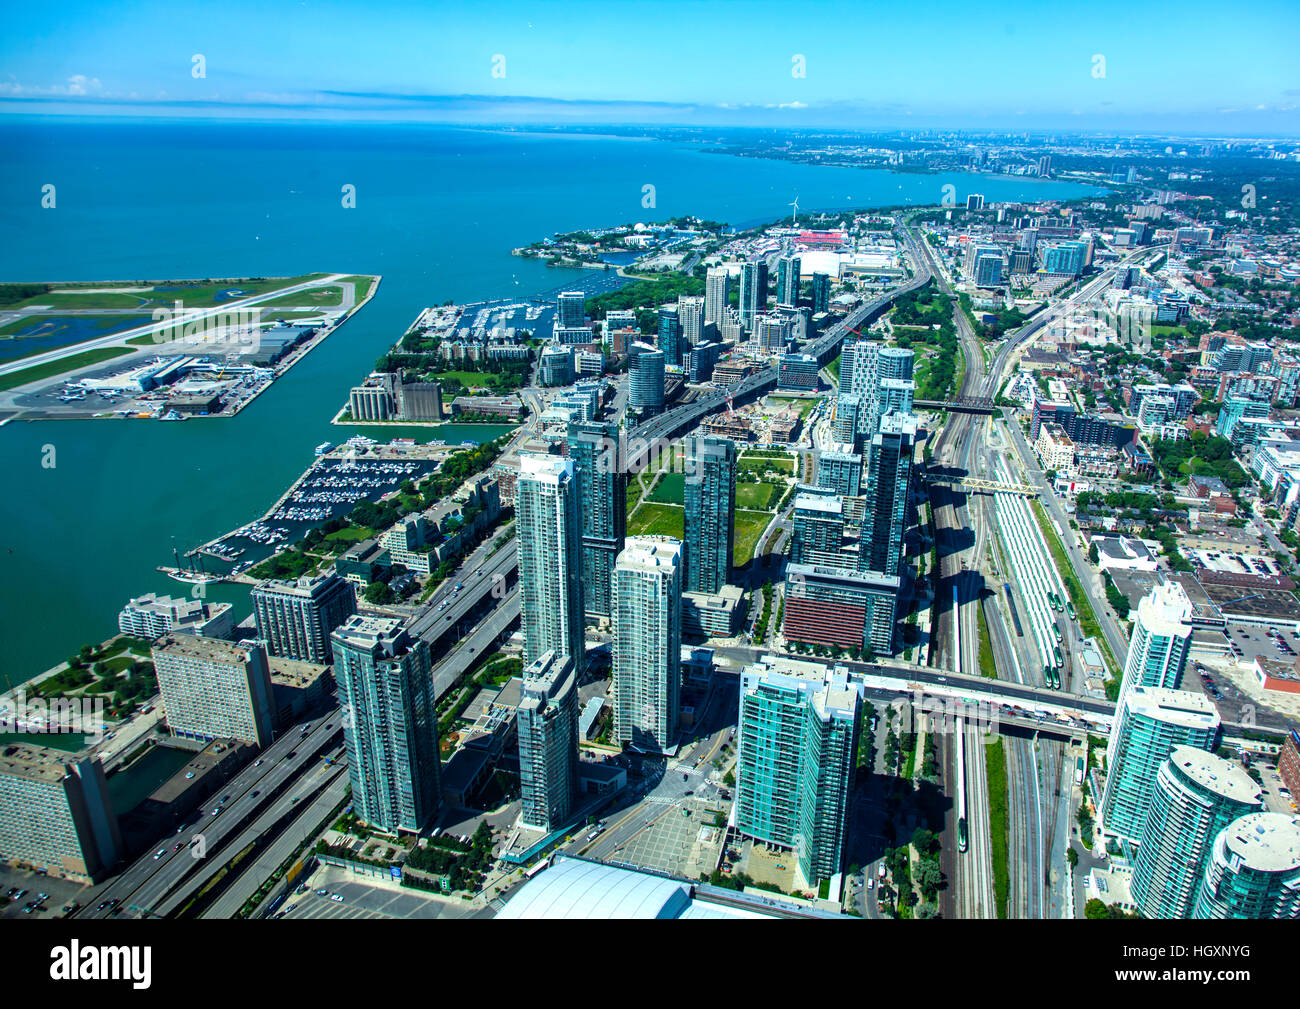 Billy Bishop Toronto City Airport and waterfrontseen from CN Tower Stock Photo